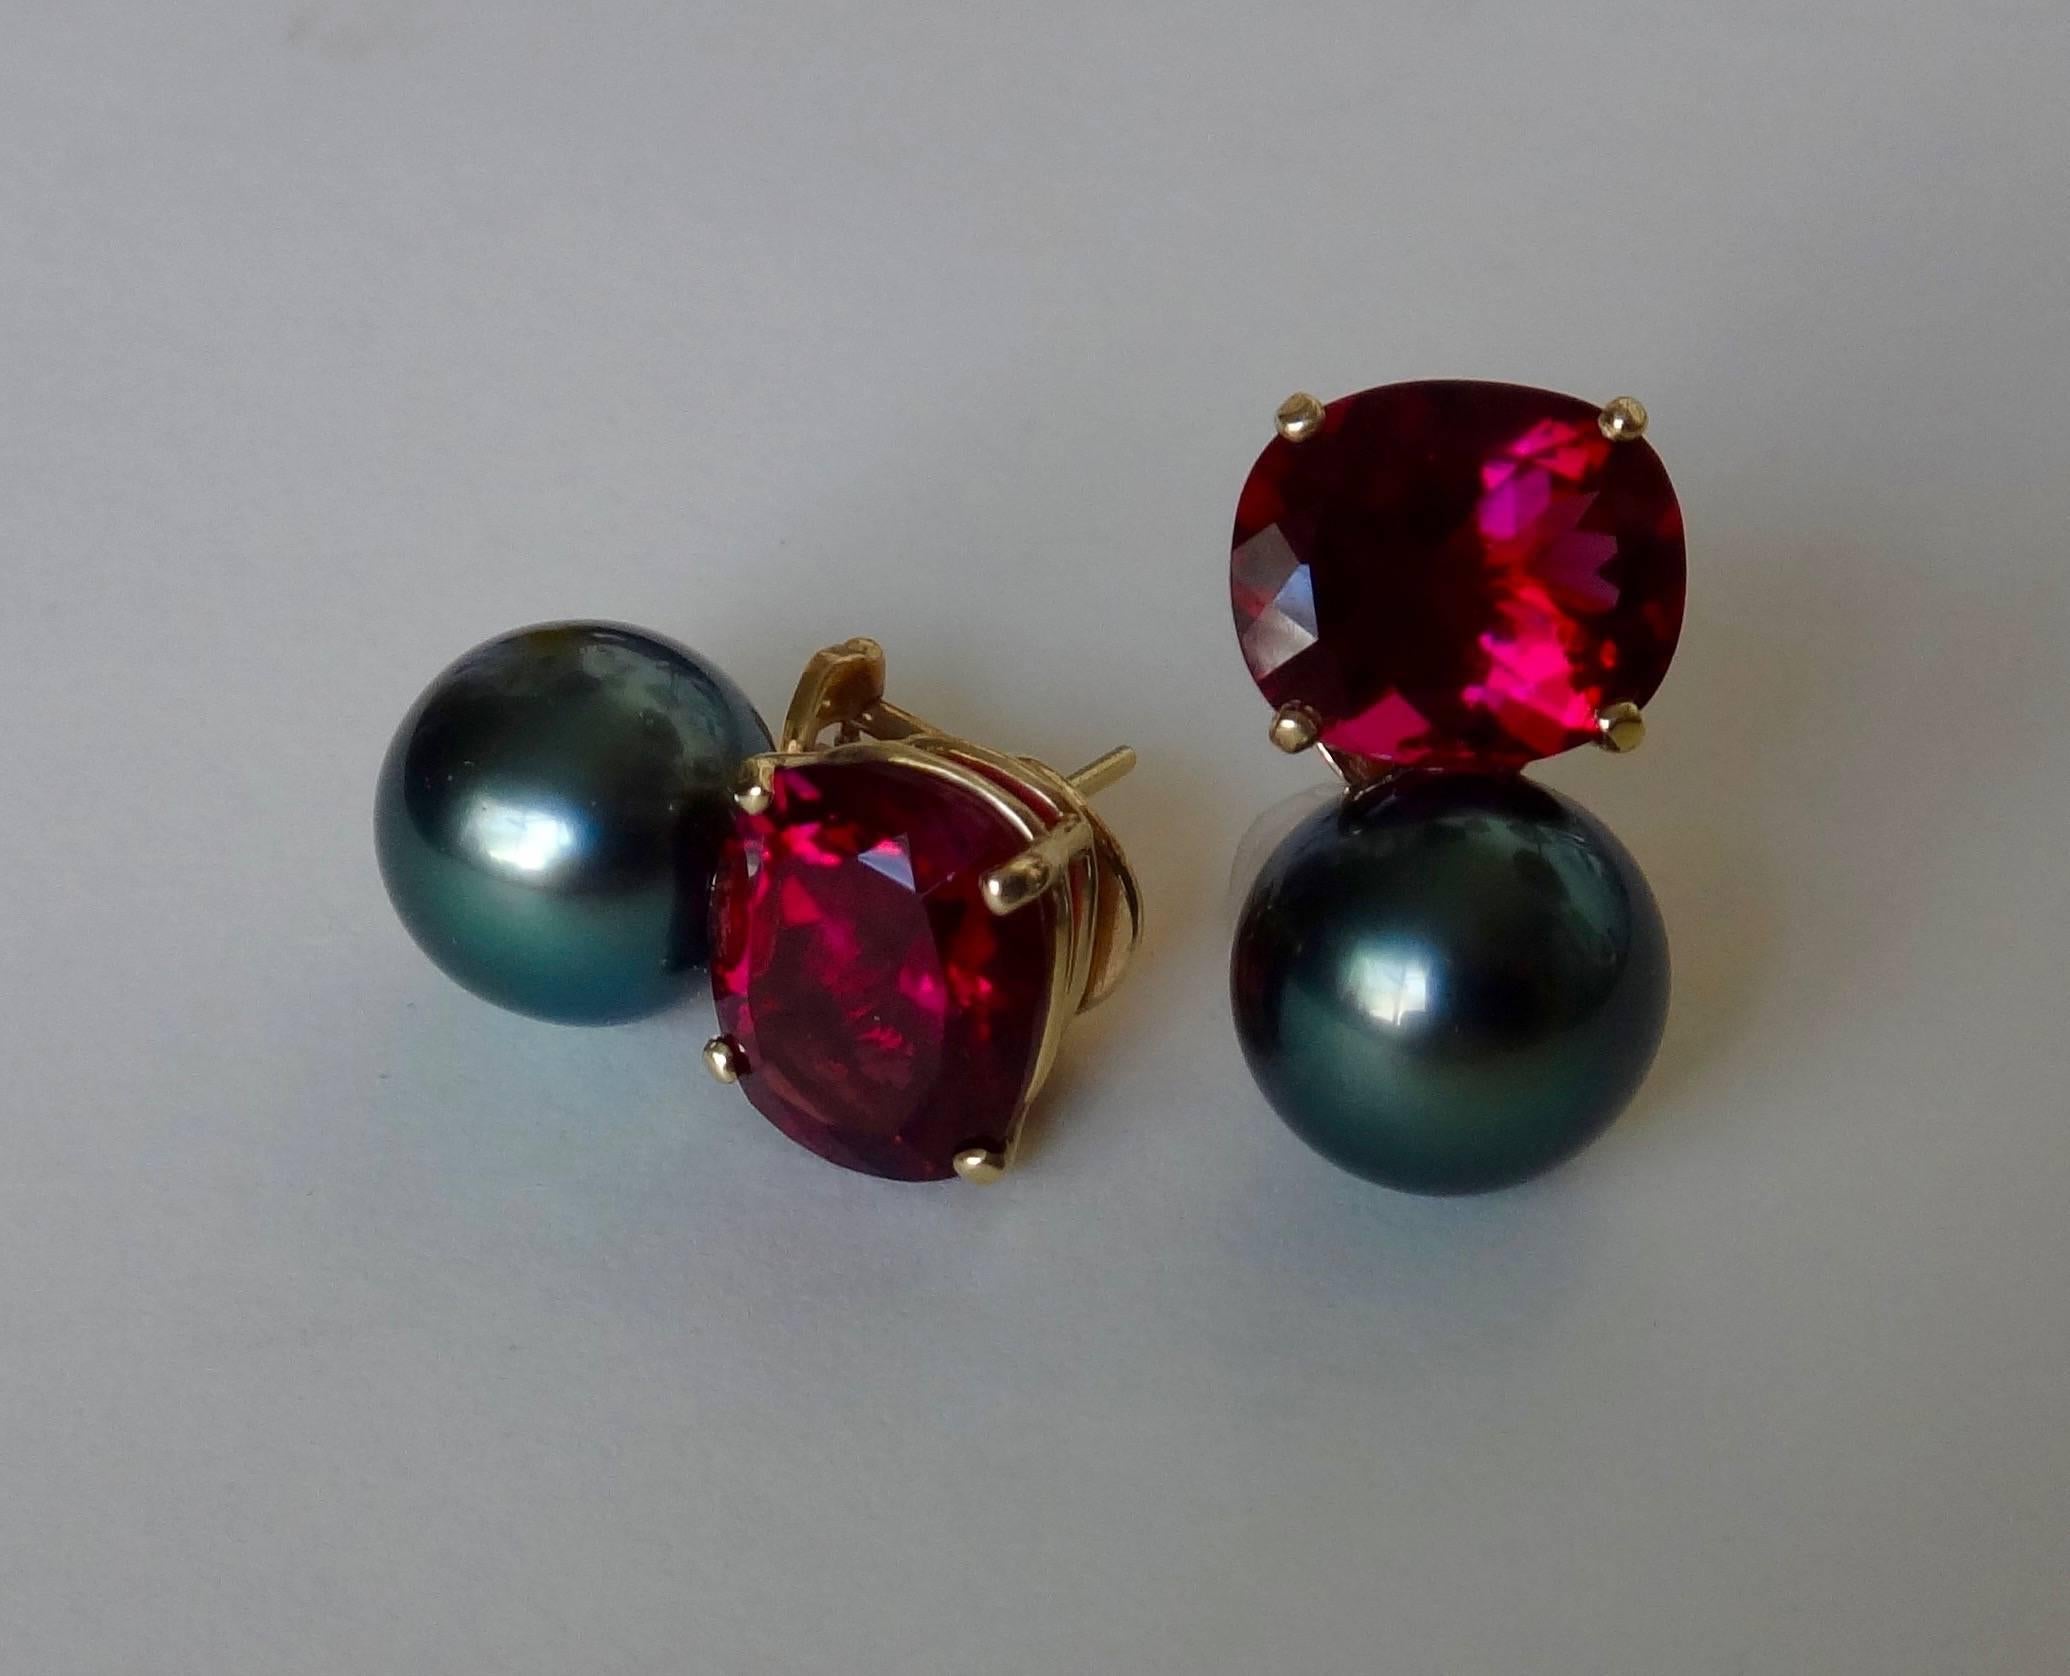 Intensely colored and perfectly matched 10 x 12 mm cushion cut rubelite (red) tourmalines are enhanced with gem quality (nearly black) 12mm Tahitian pearls.  Posts with omega clip backs.  